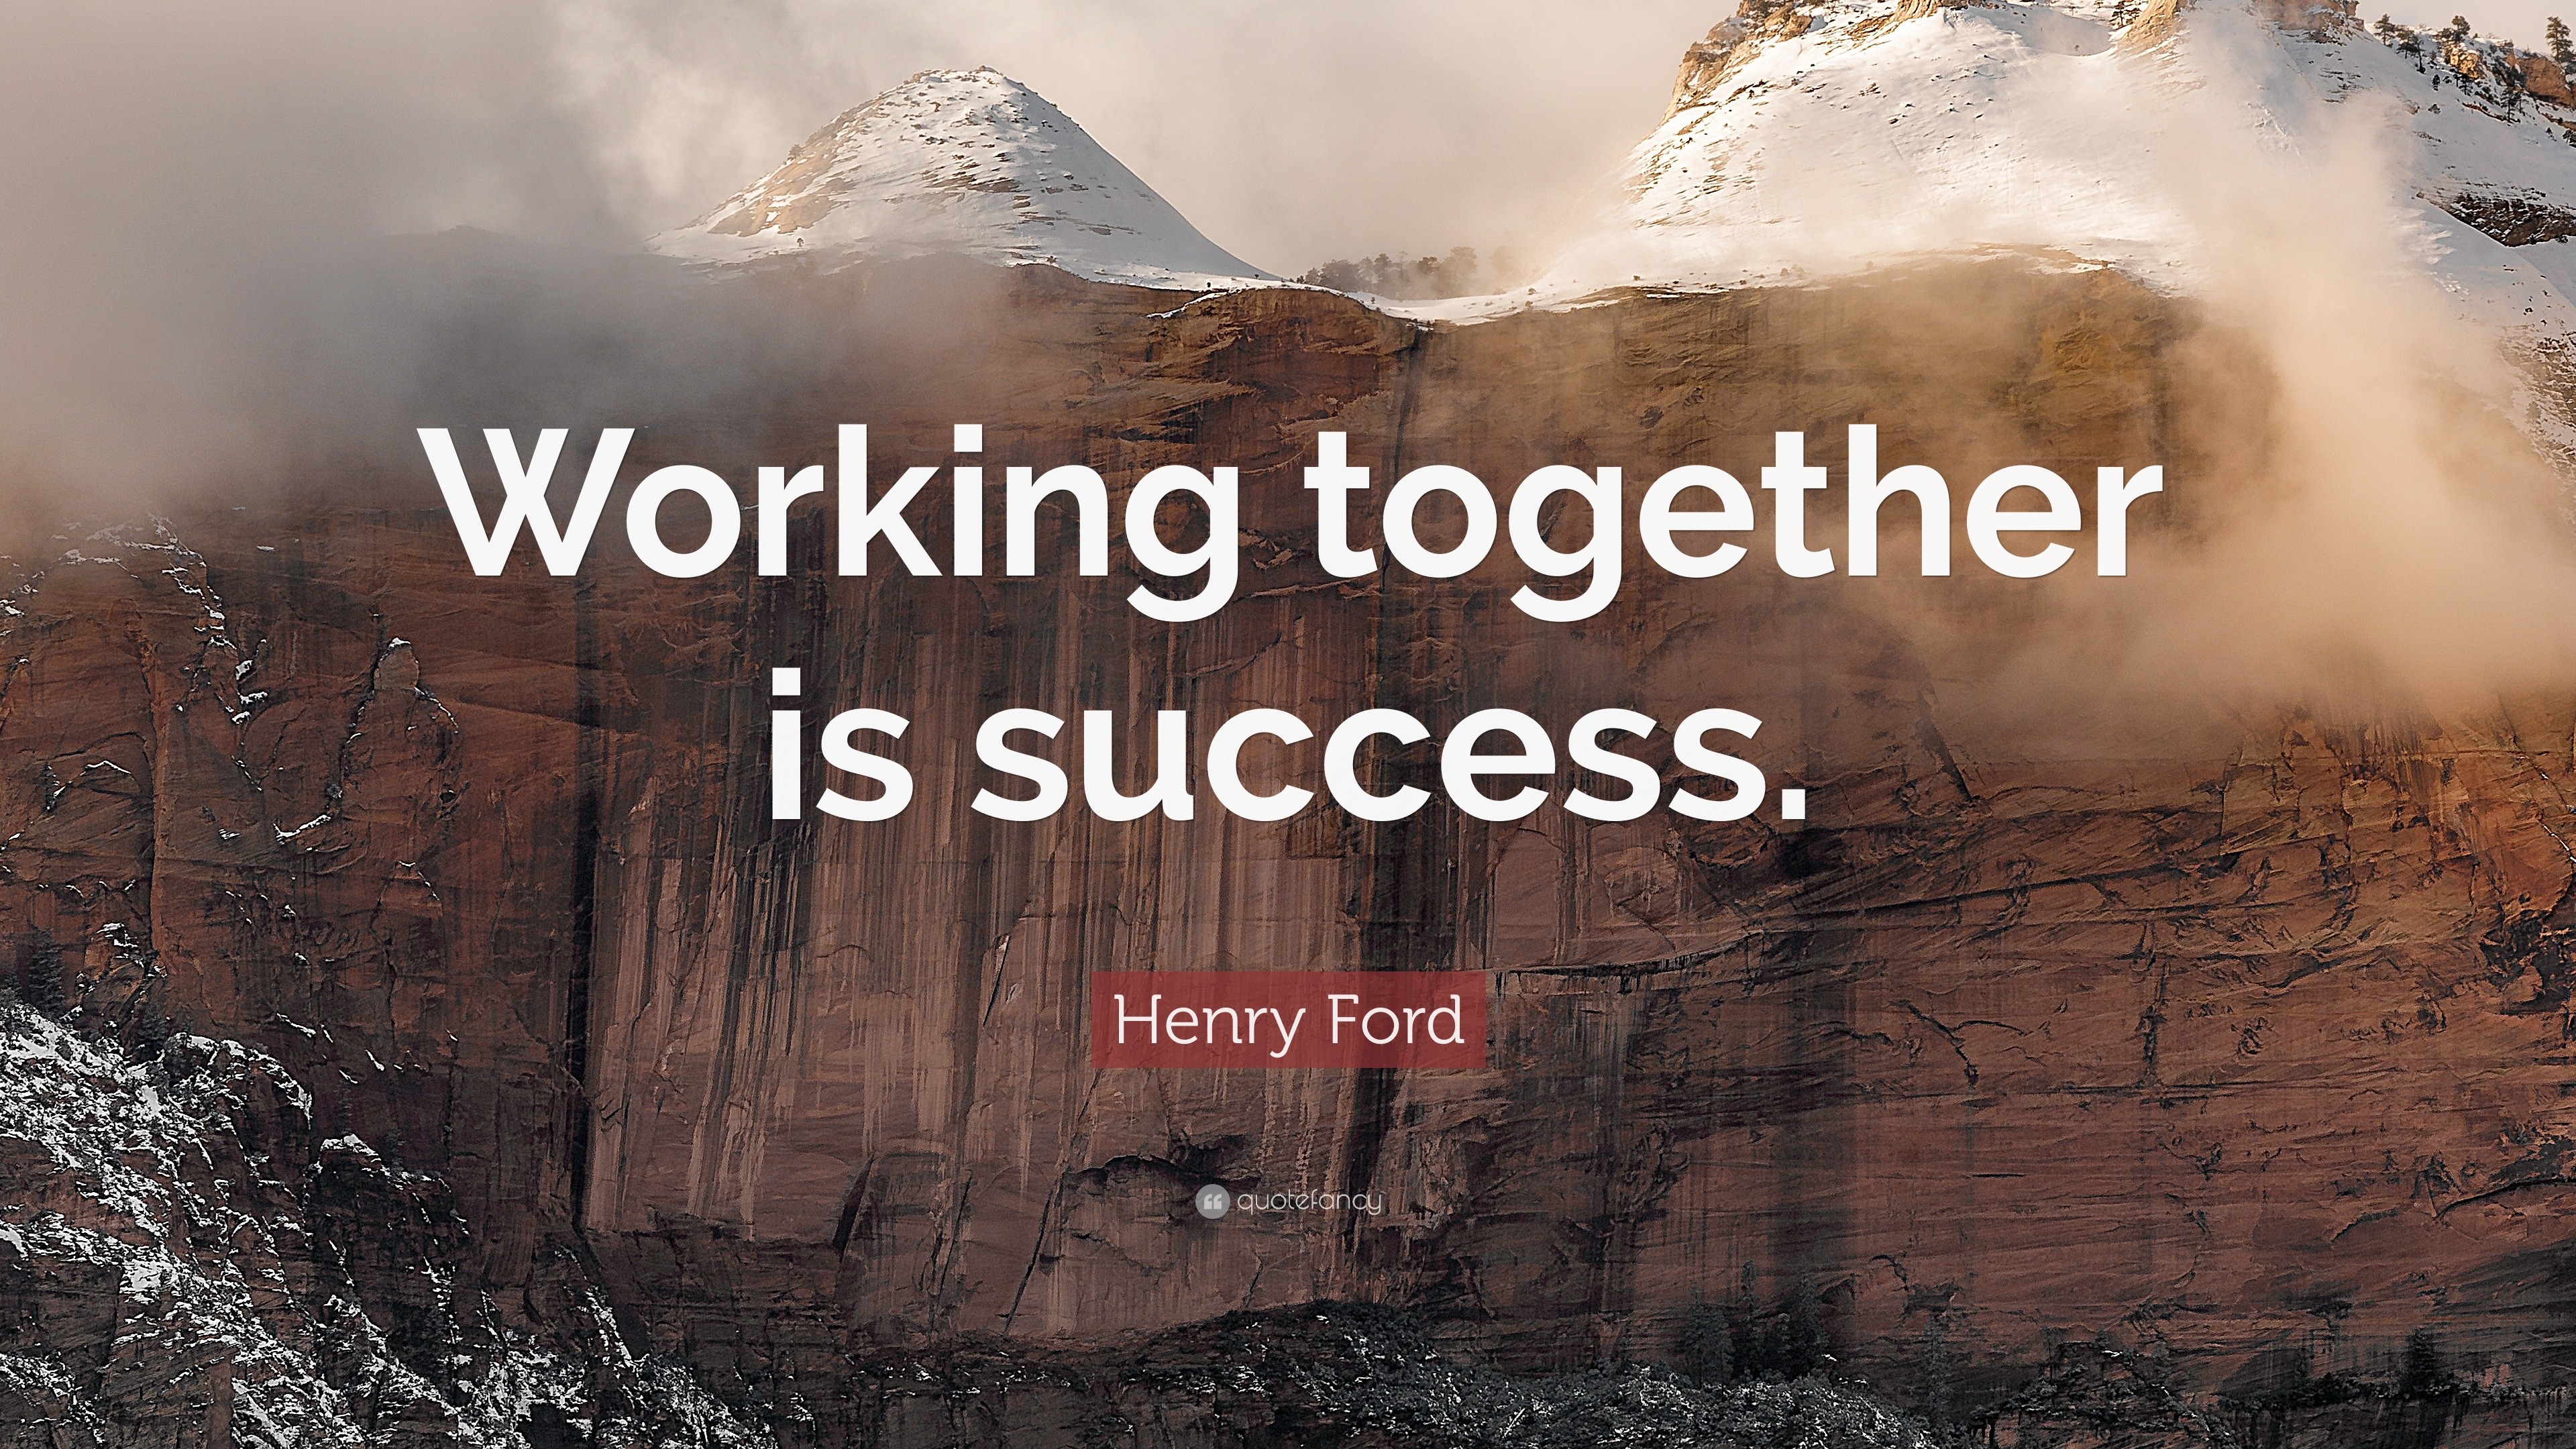 Henry Ford Quote: “Working together is success.”